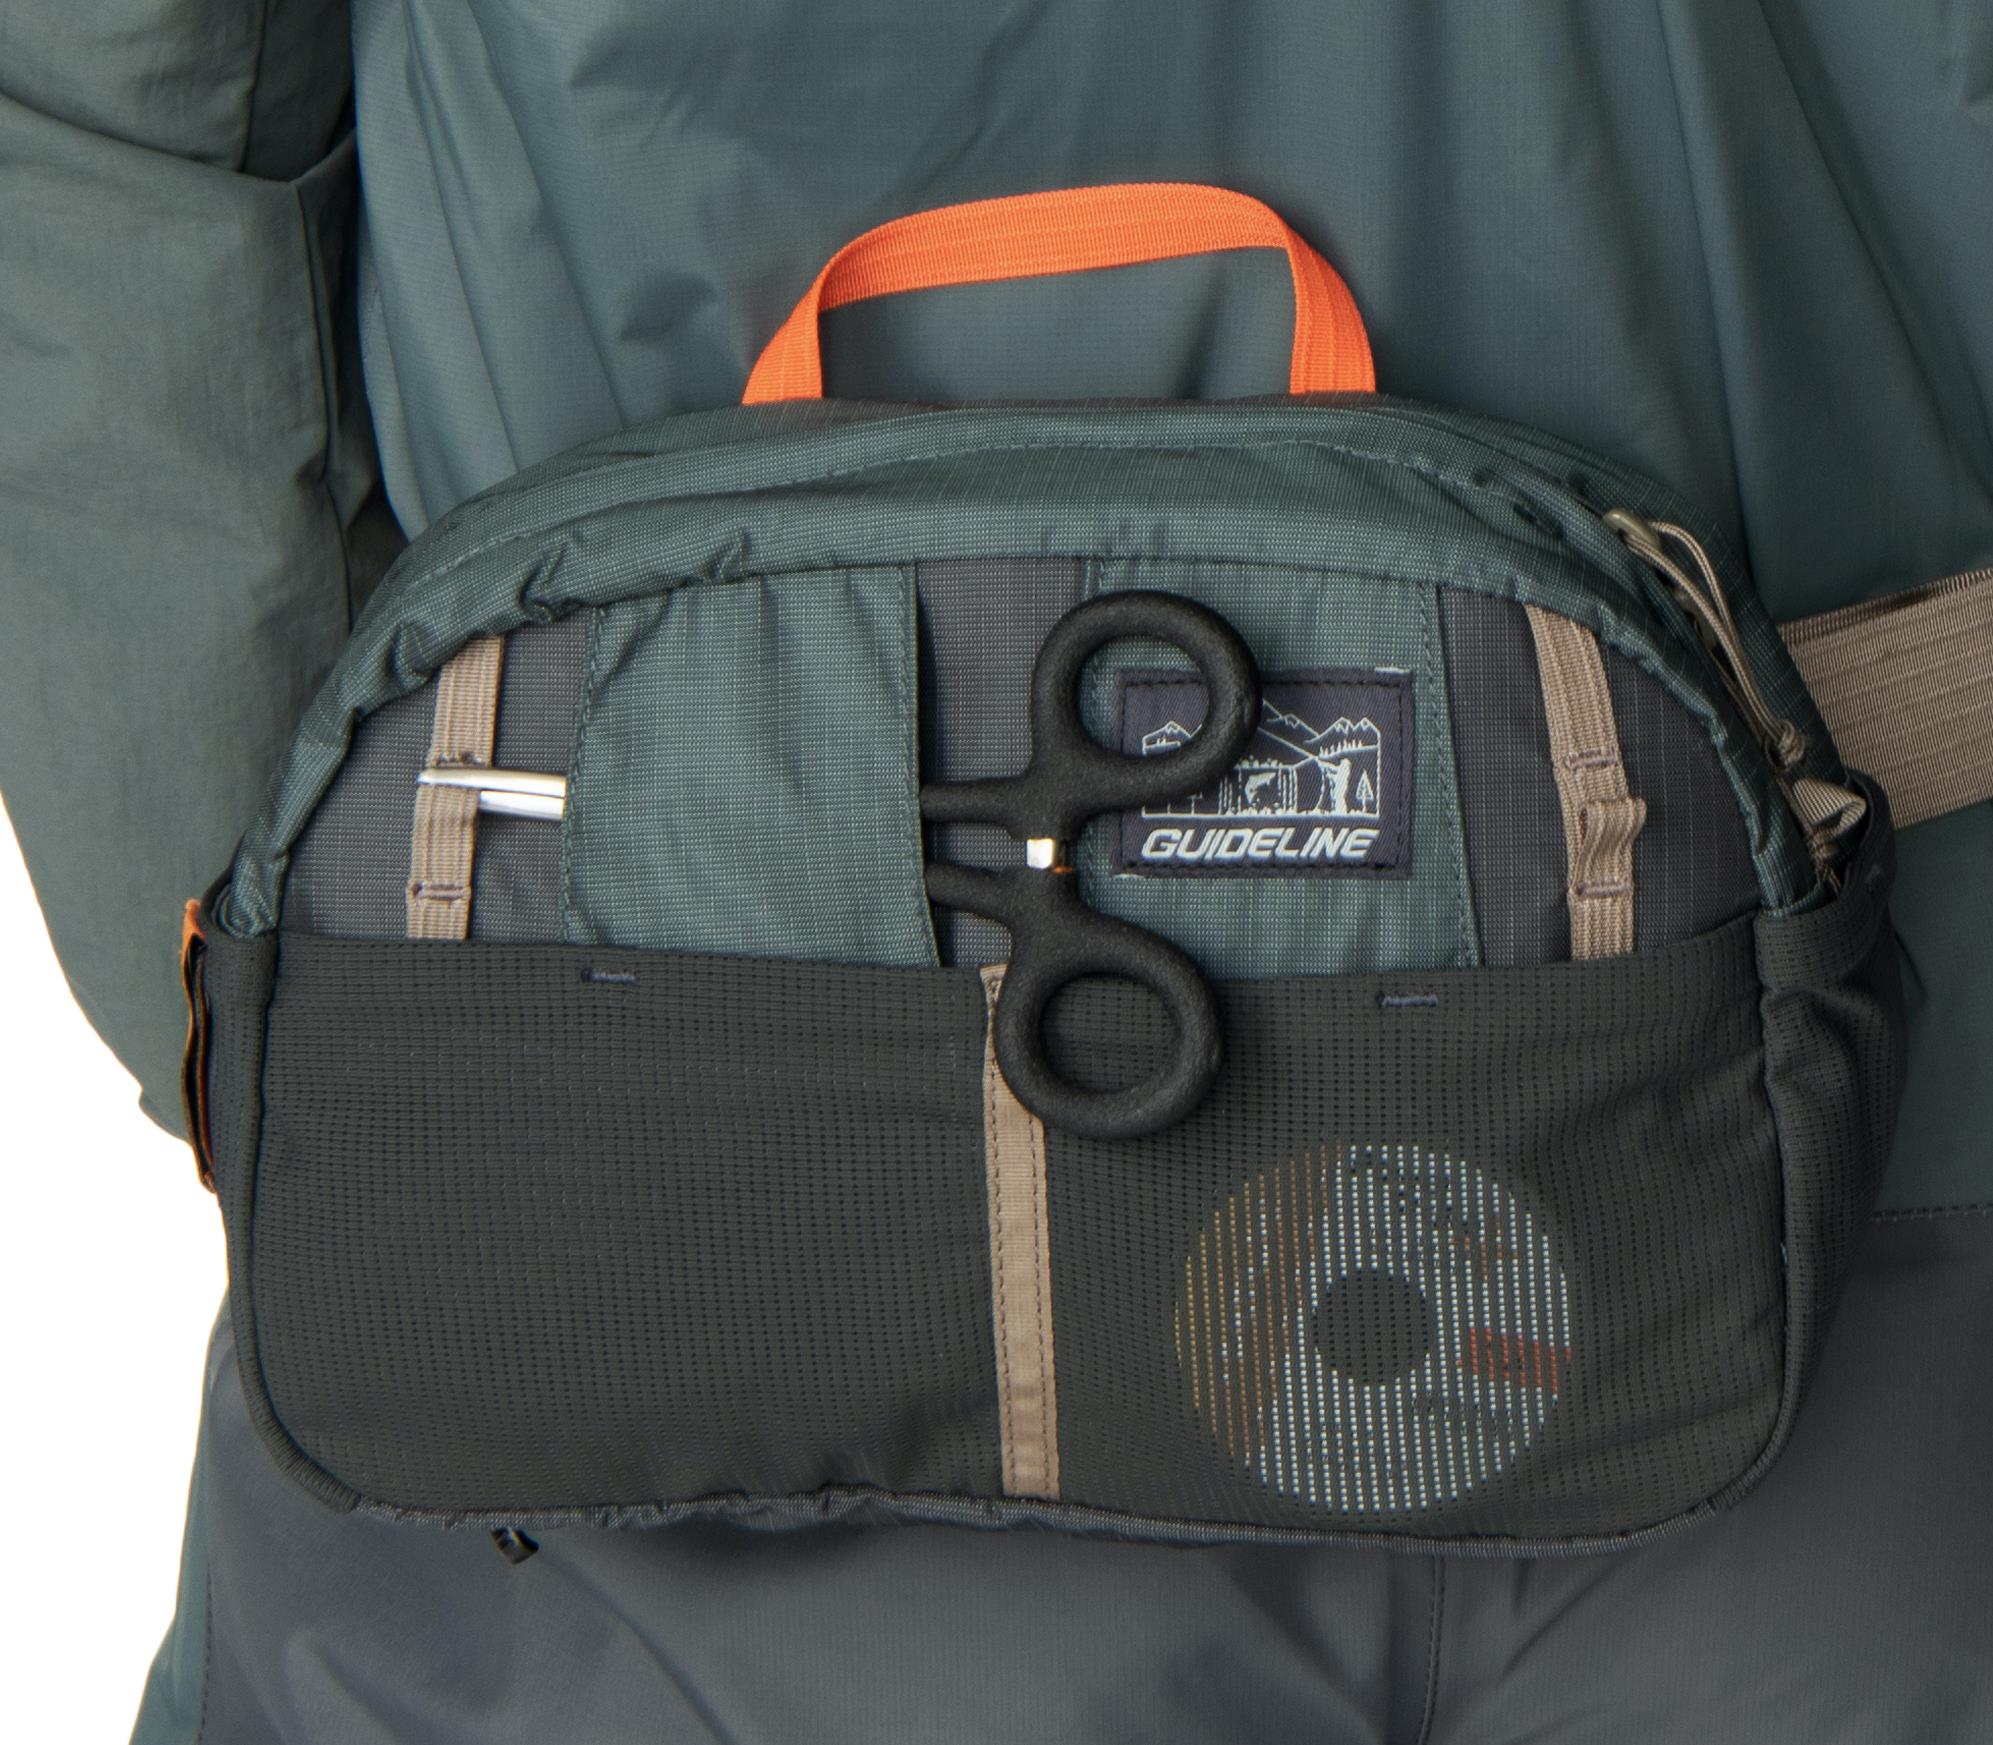 The ULBC Waistbag 3 - Guideline Fly Fish Canada